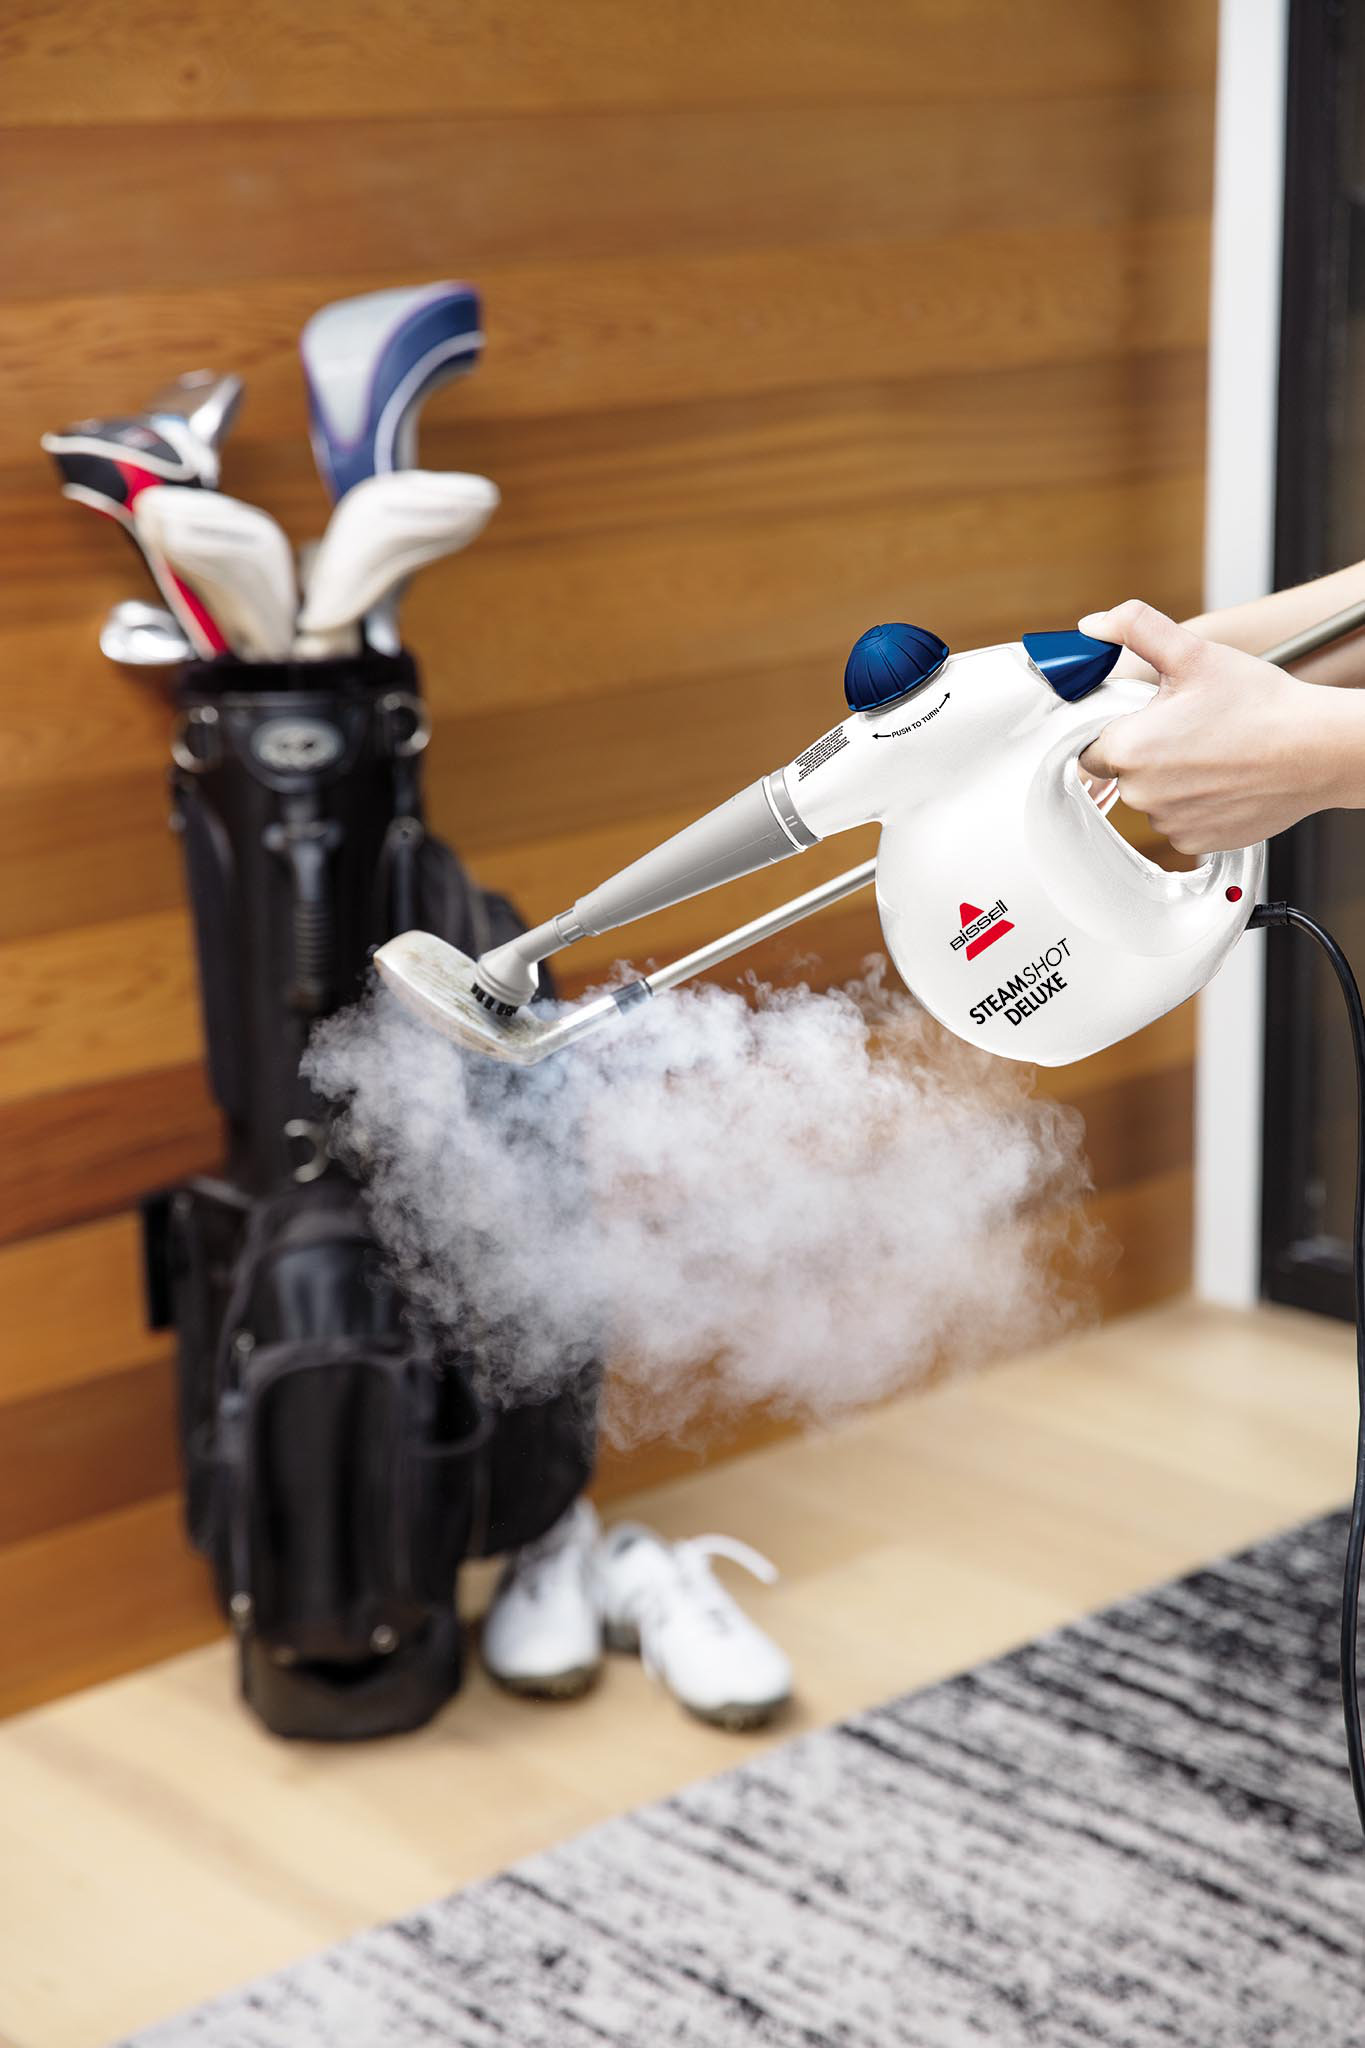 Bissell Steam Shot Review: We Tested the Viral Steam Cleaner